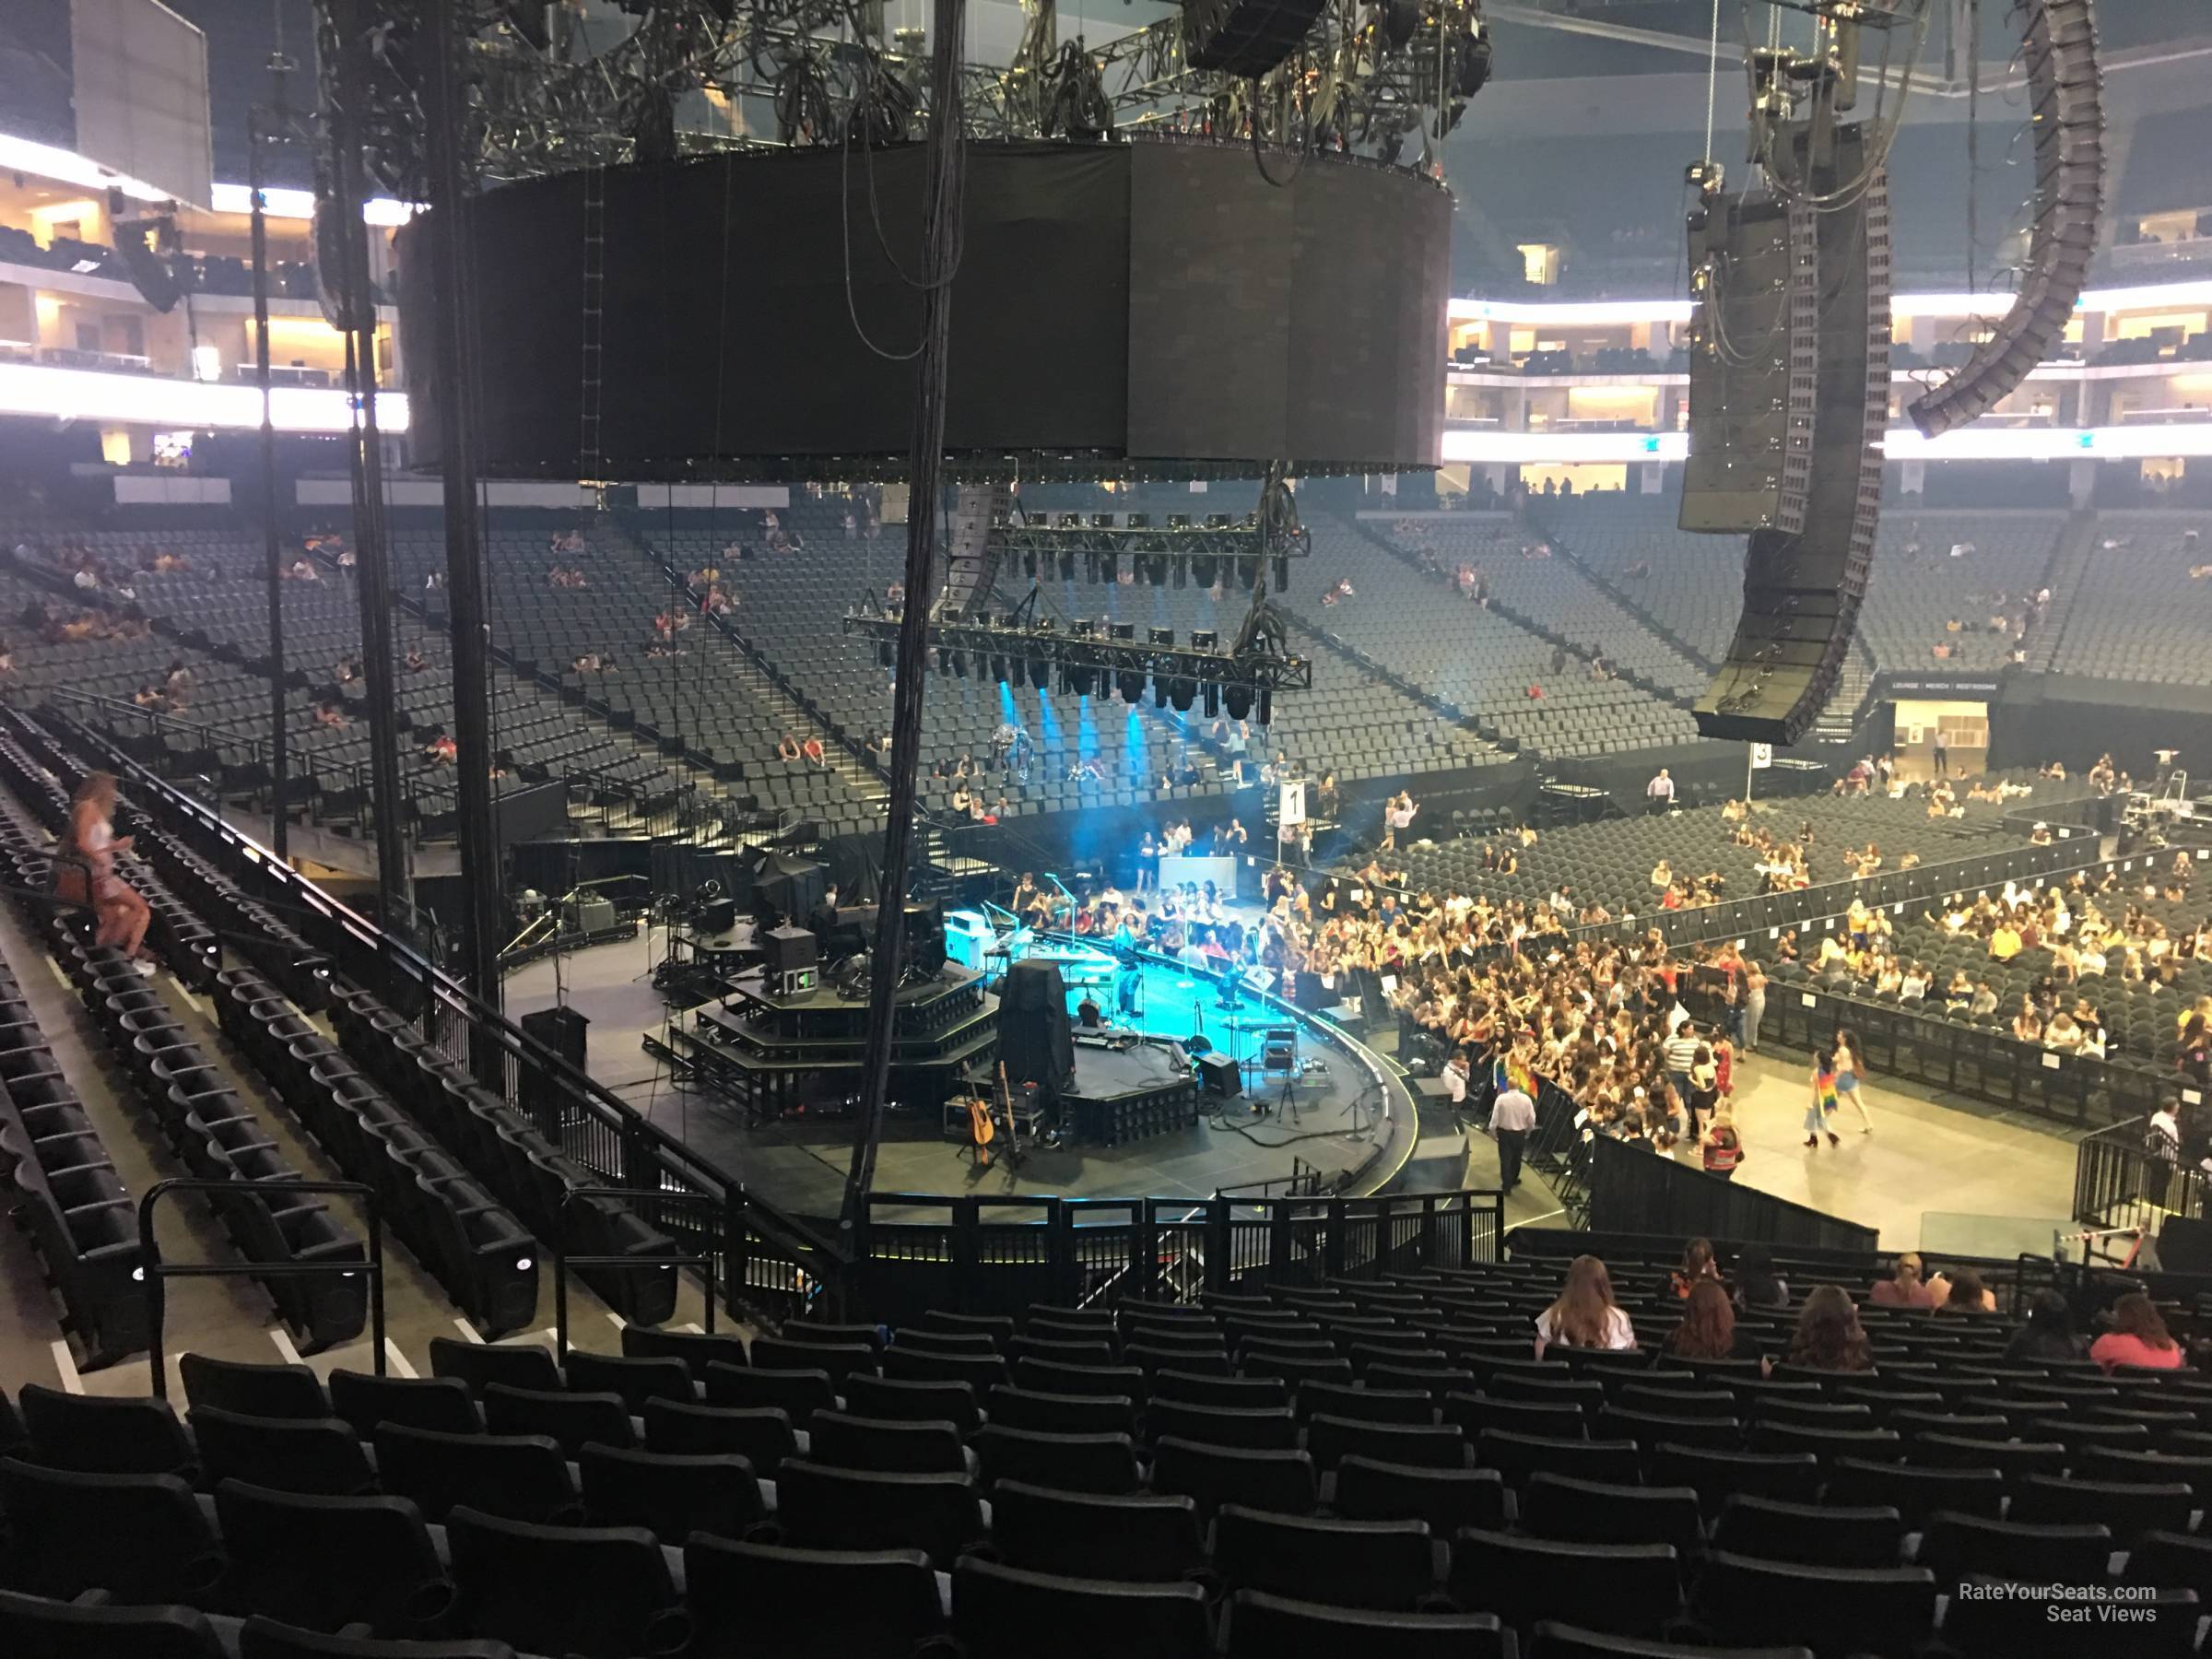 Golden 1 Center Section 124 Concert Seating - RateYourSeats.com